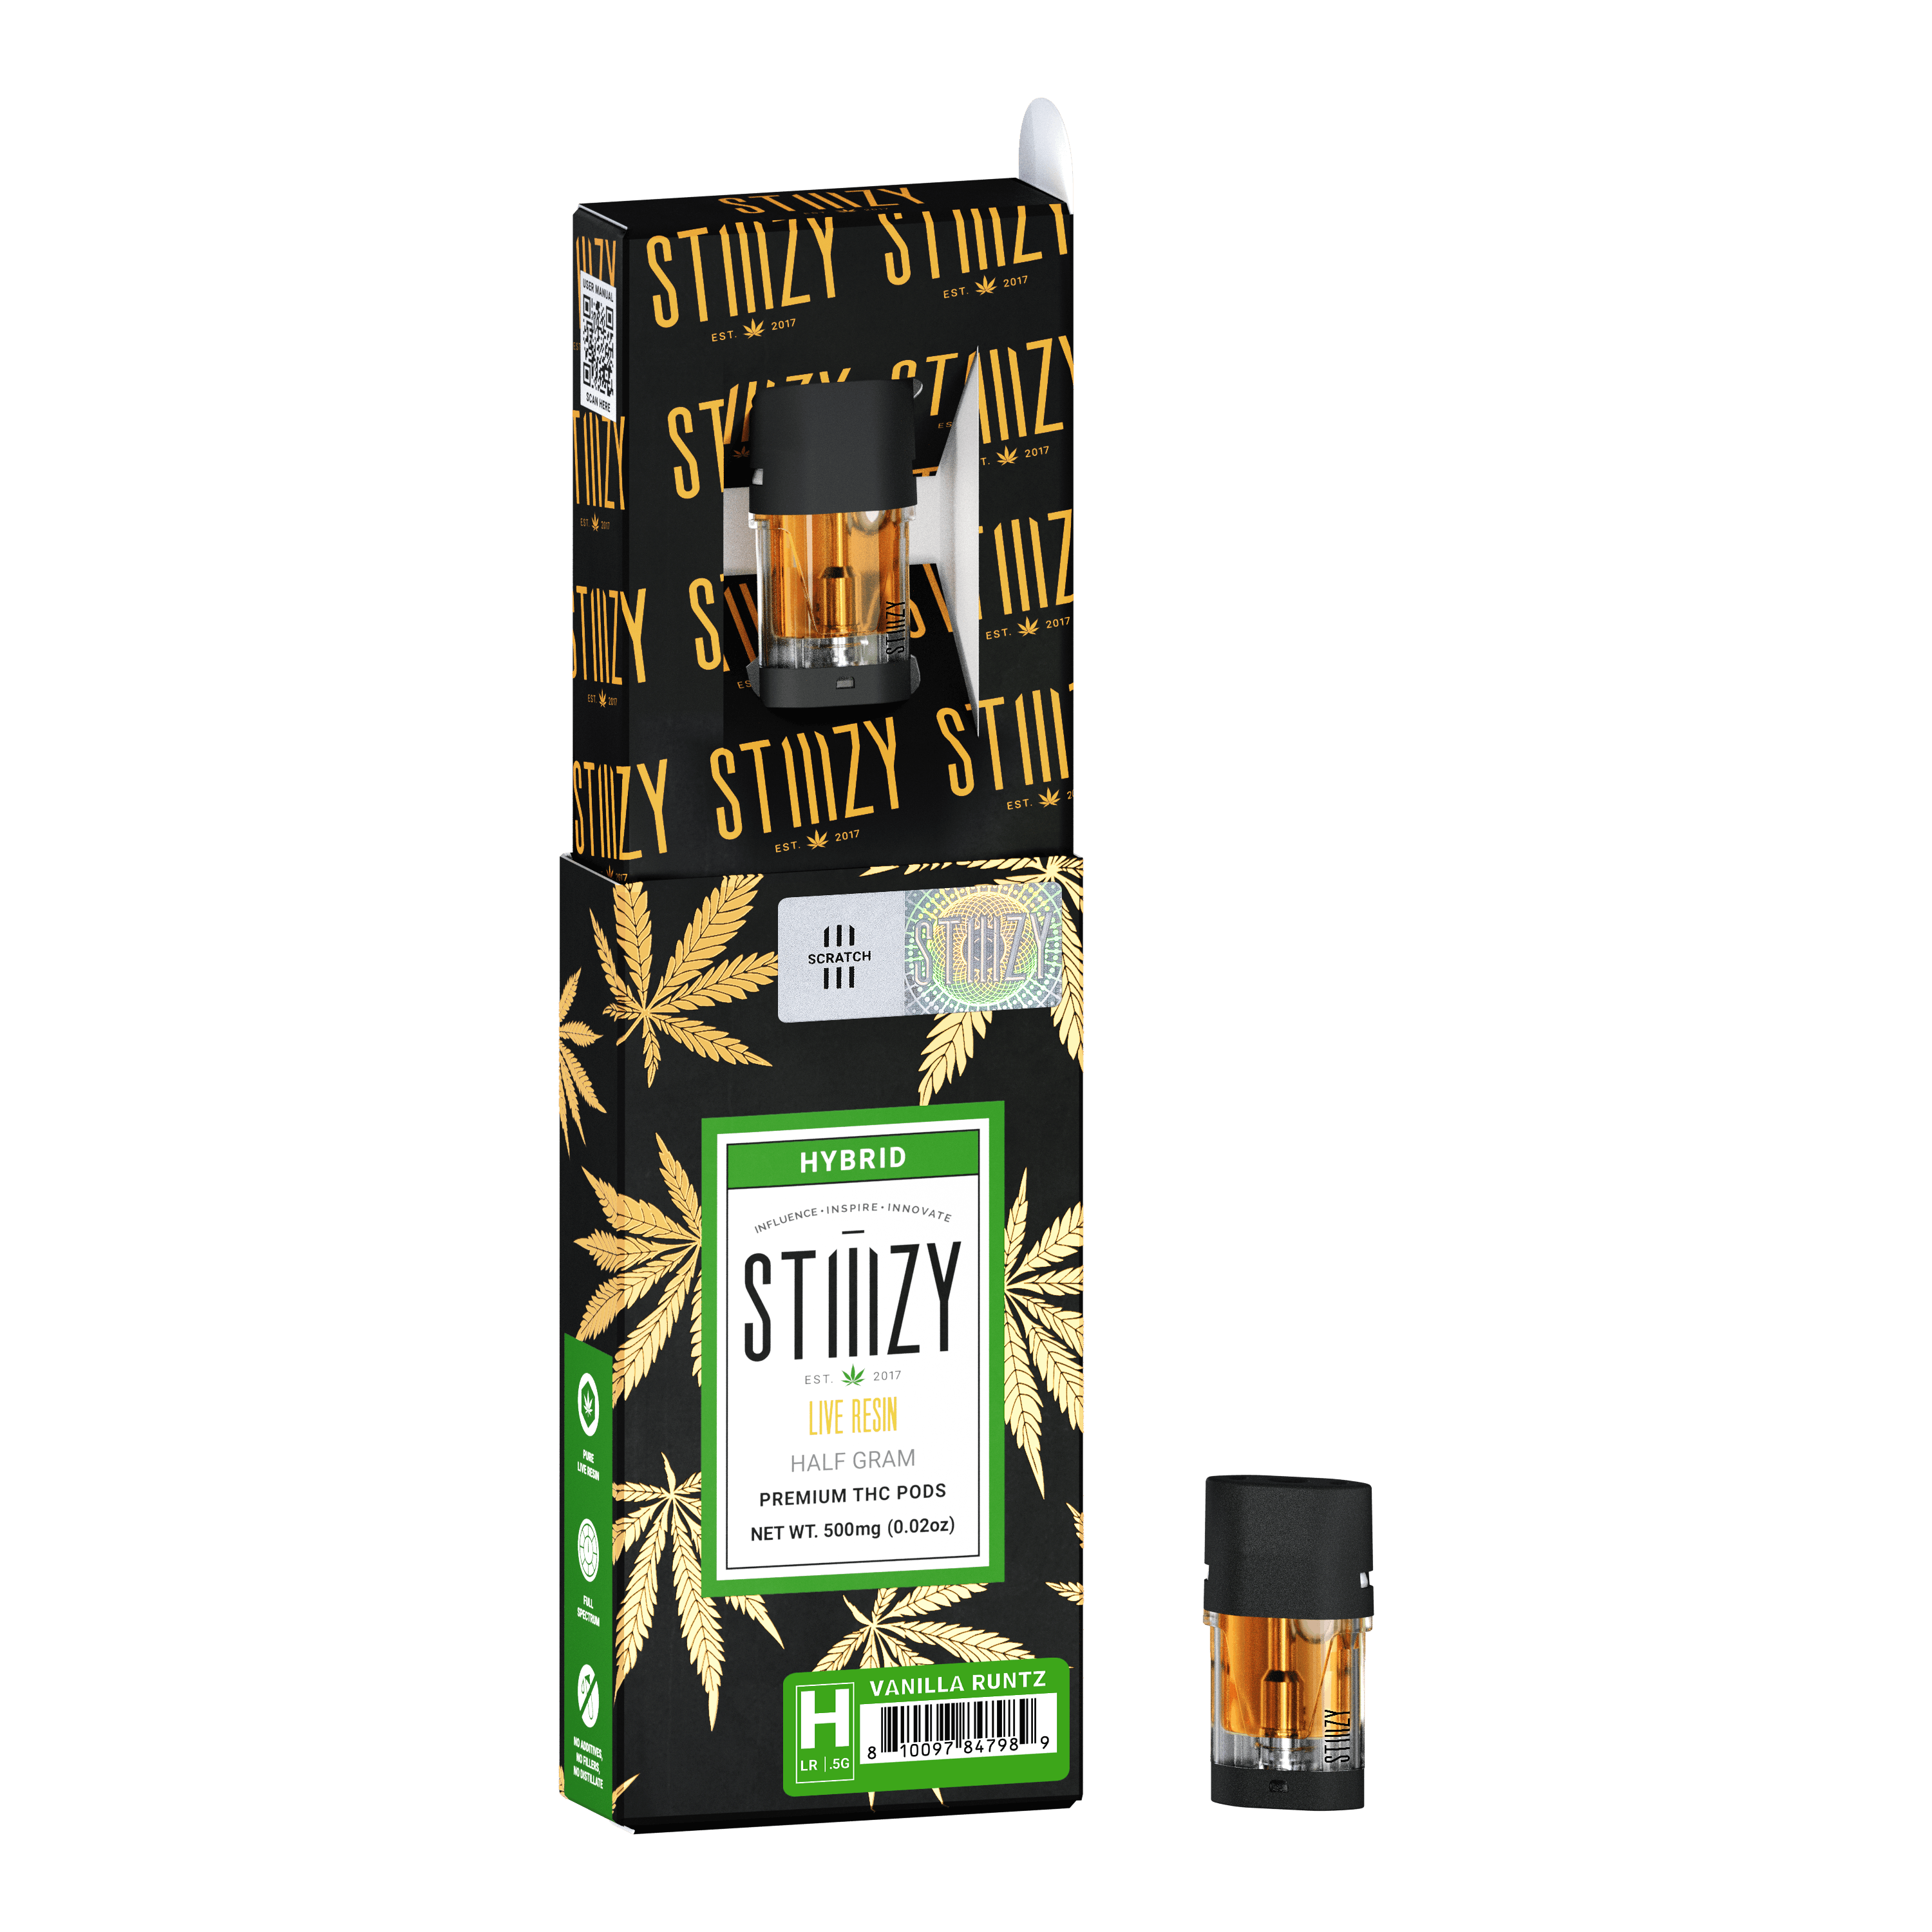 One-half live resin weed vape pods derived from the Vanilla Runtz weed strain are inside and outside of their black box.